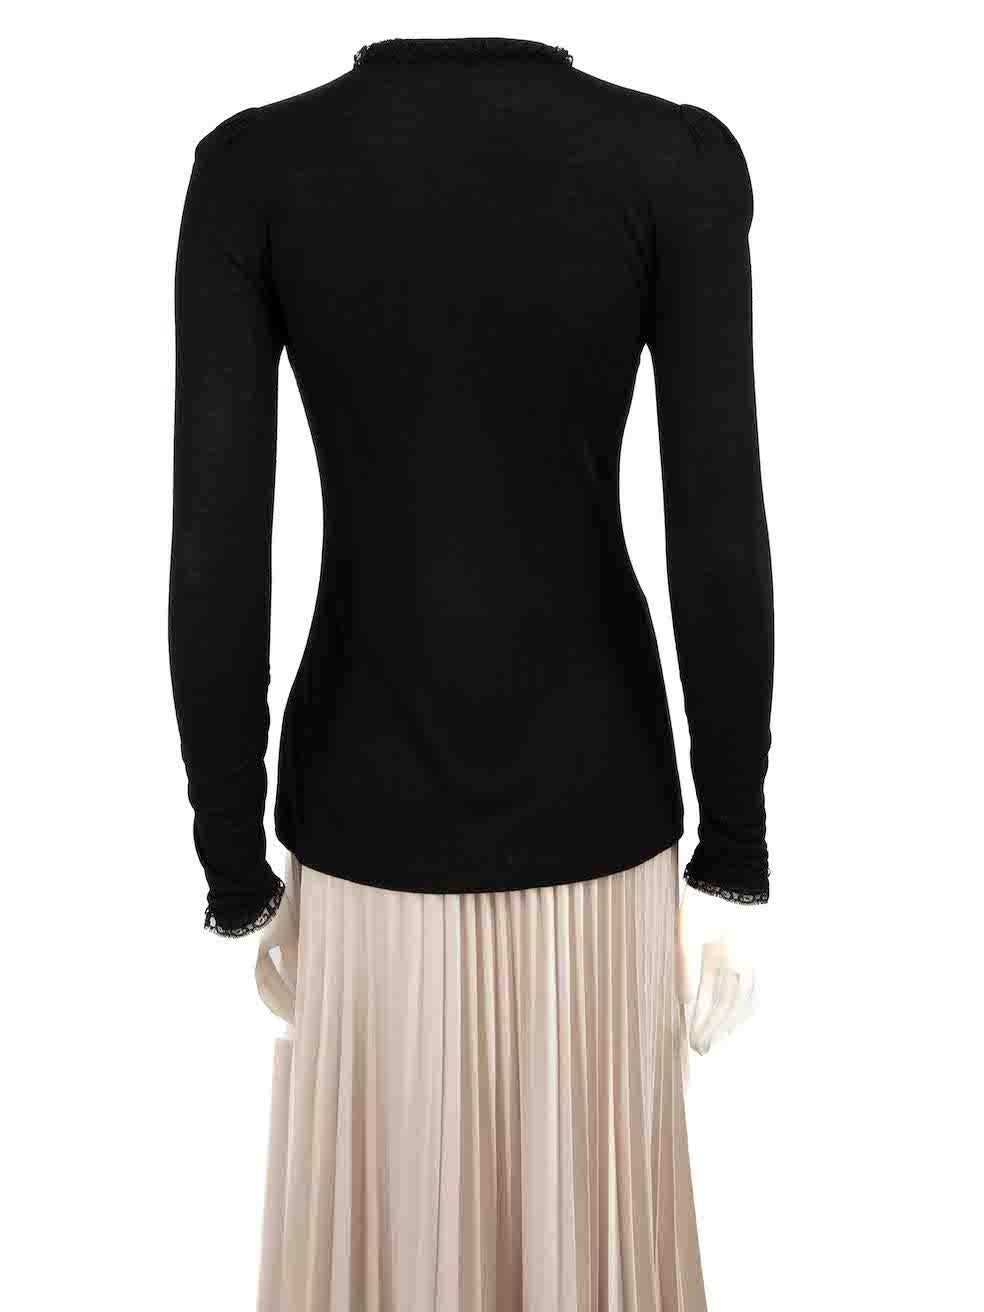 Dolce & Gabbana Black Jersey Lace Trim Top Size XS In Good Condition For Sale In London, GB